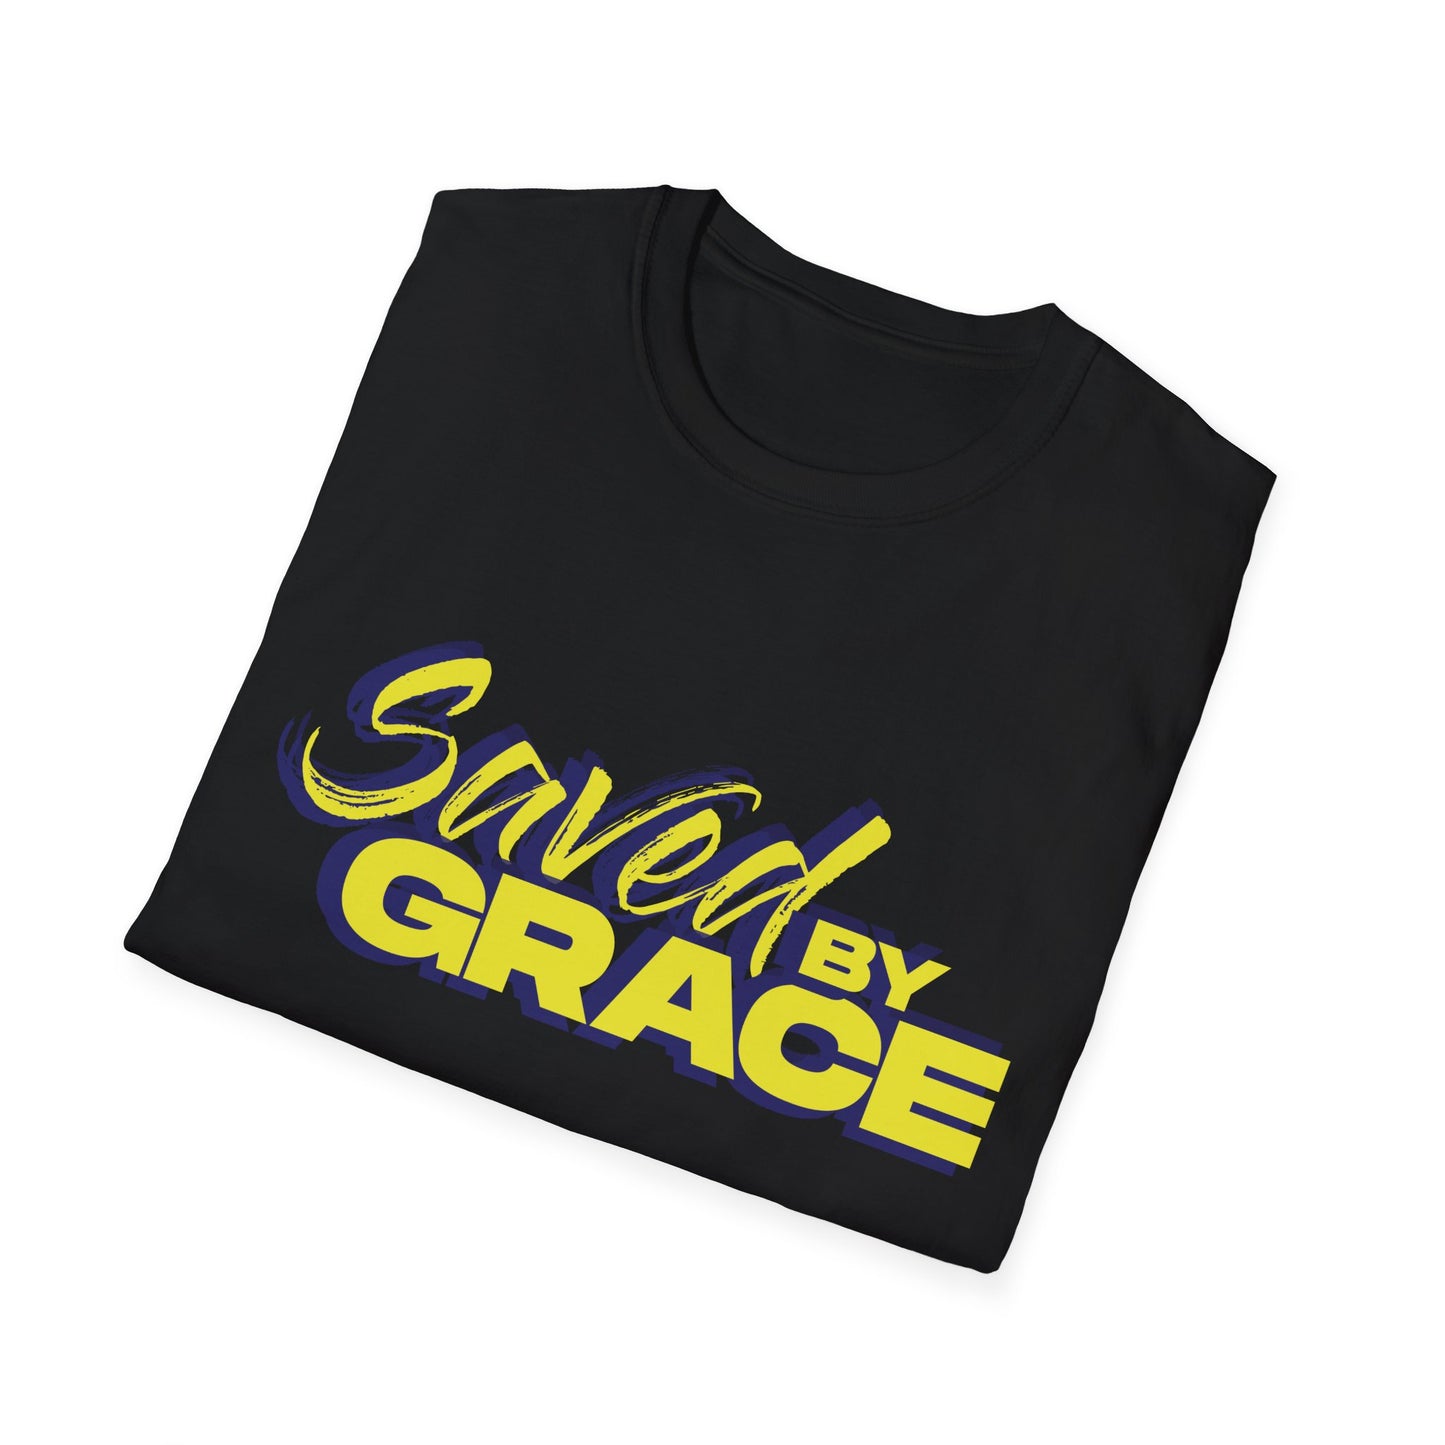 Saved By Grace | Unisex T-shirt